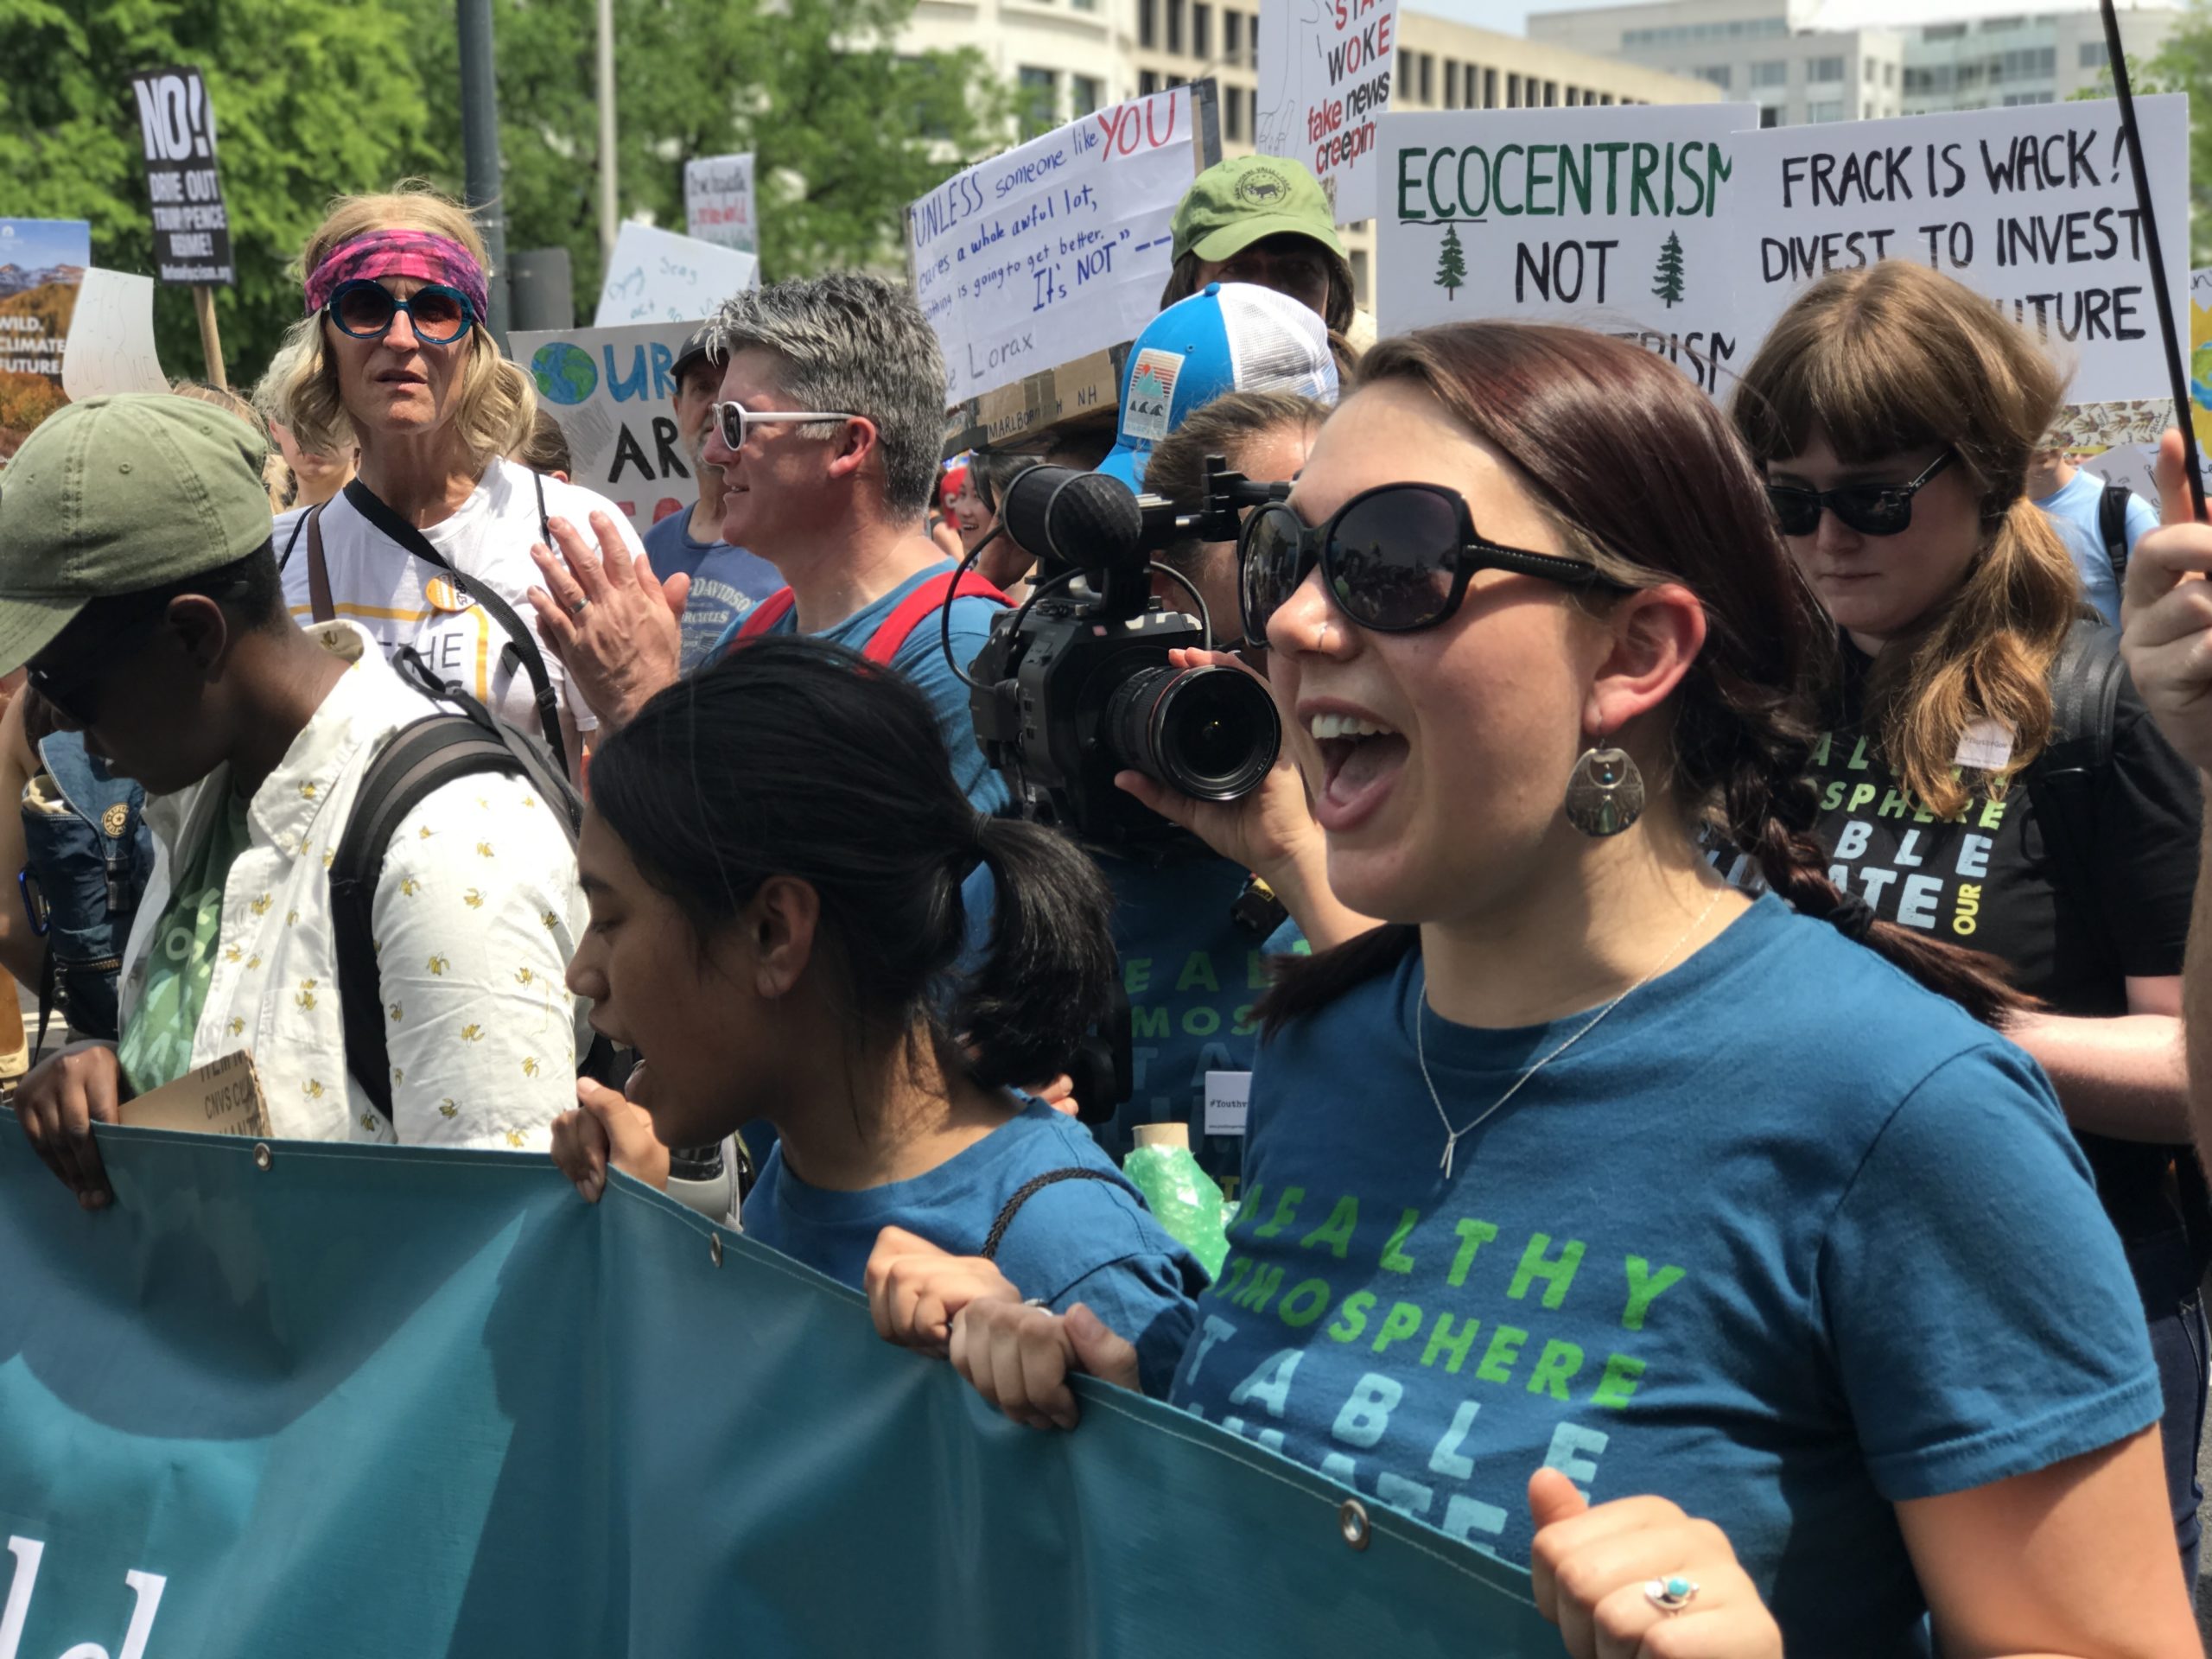 Director Christi Cooper, center, with camera, filming during a youth climate march.